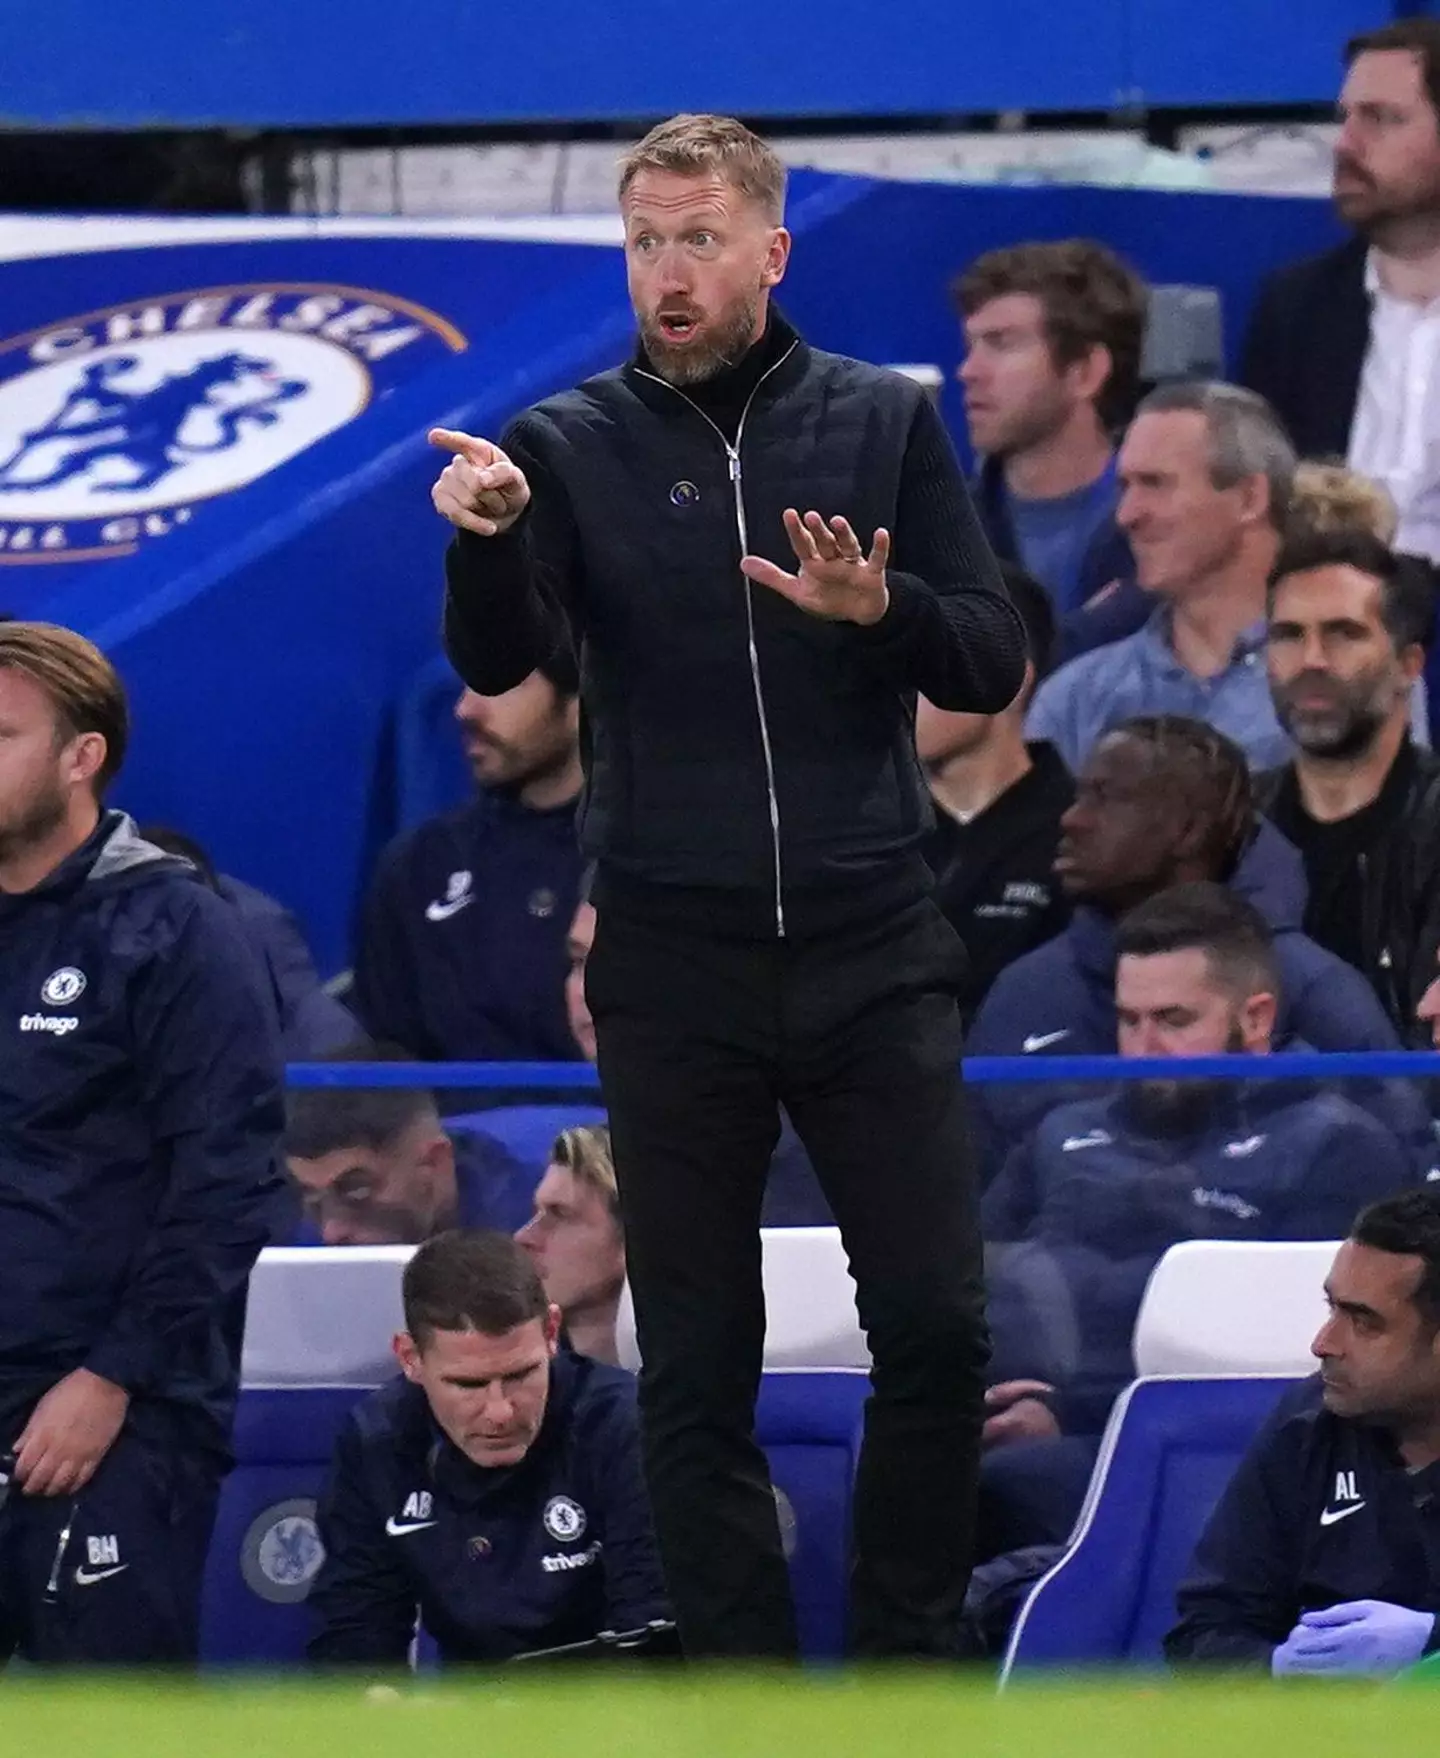 Chelsea manager Graham Potter gestures on the touchline during the Premier League match at Stamford Bridge. (Alamy)